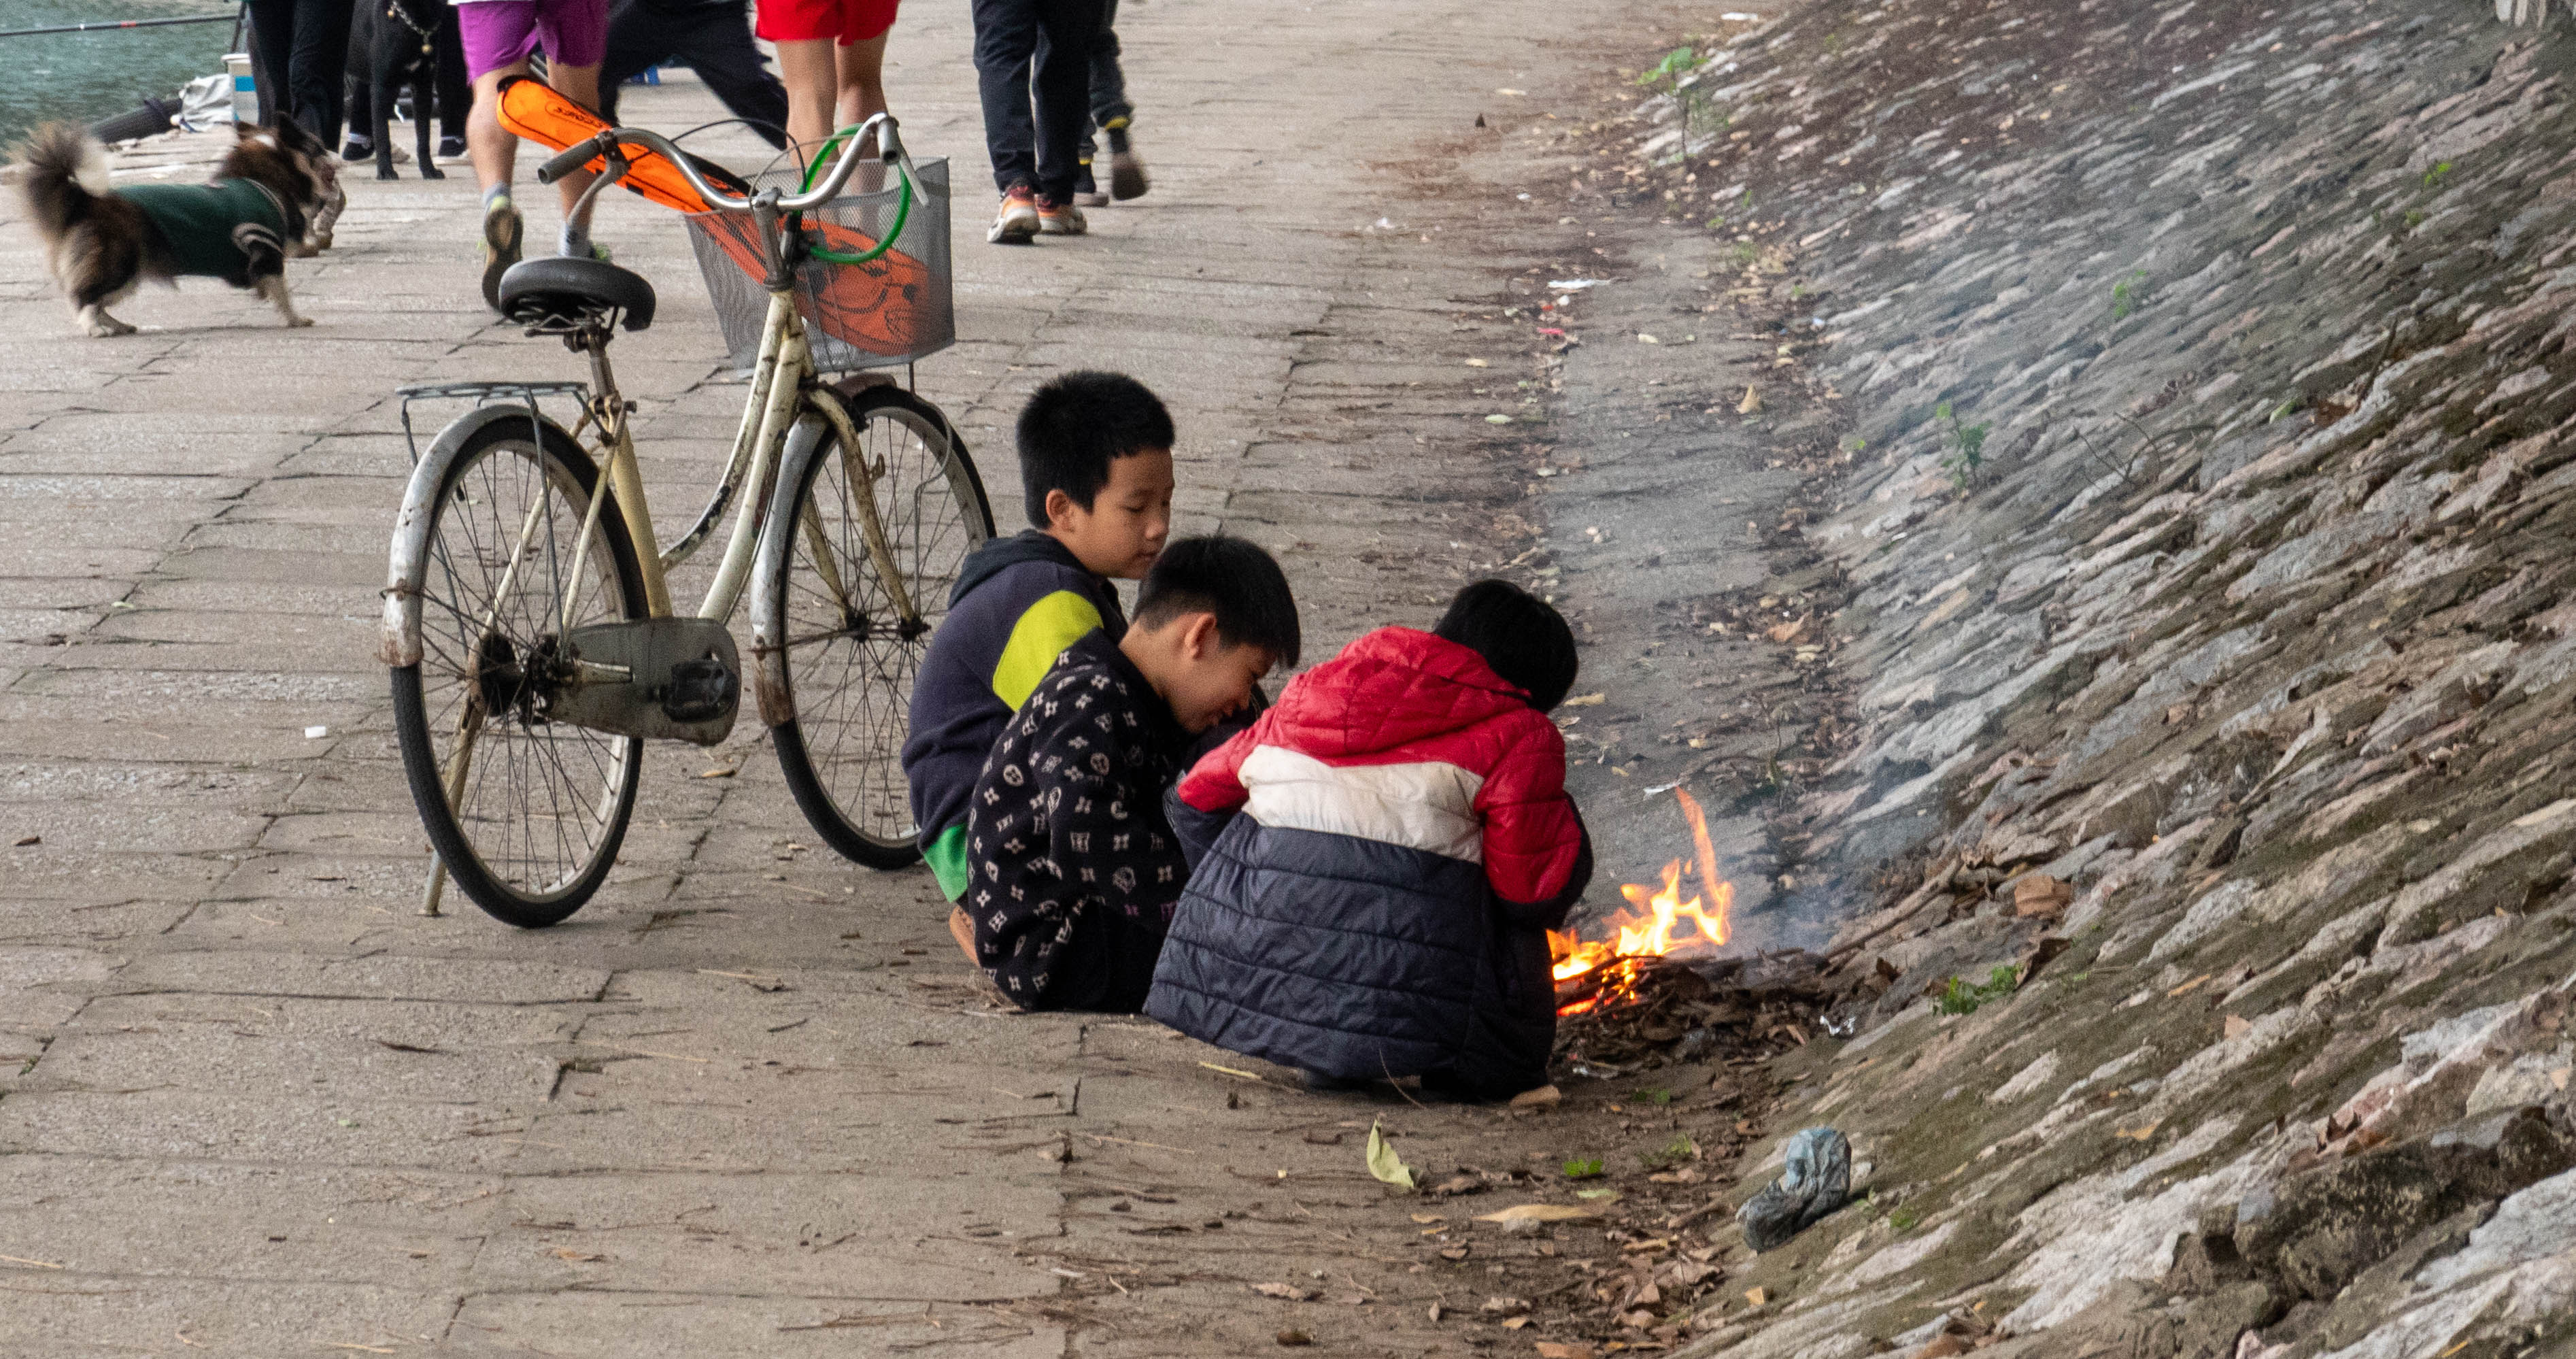 Picture of 3 you children squating in front of a small fire.  A bicycle is to the left of the picture